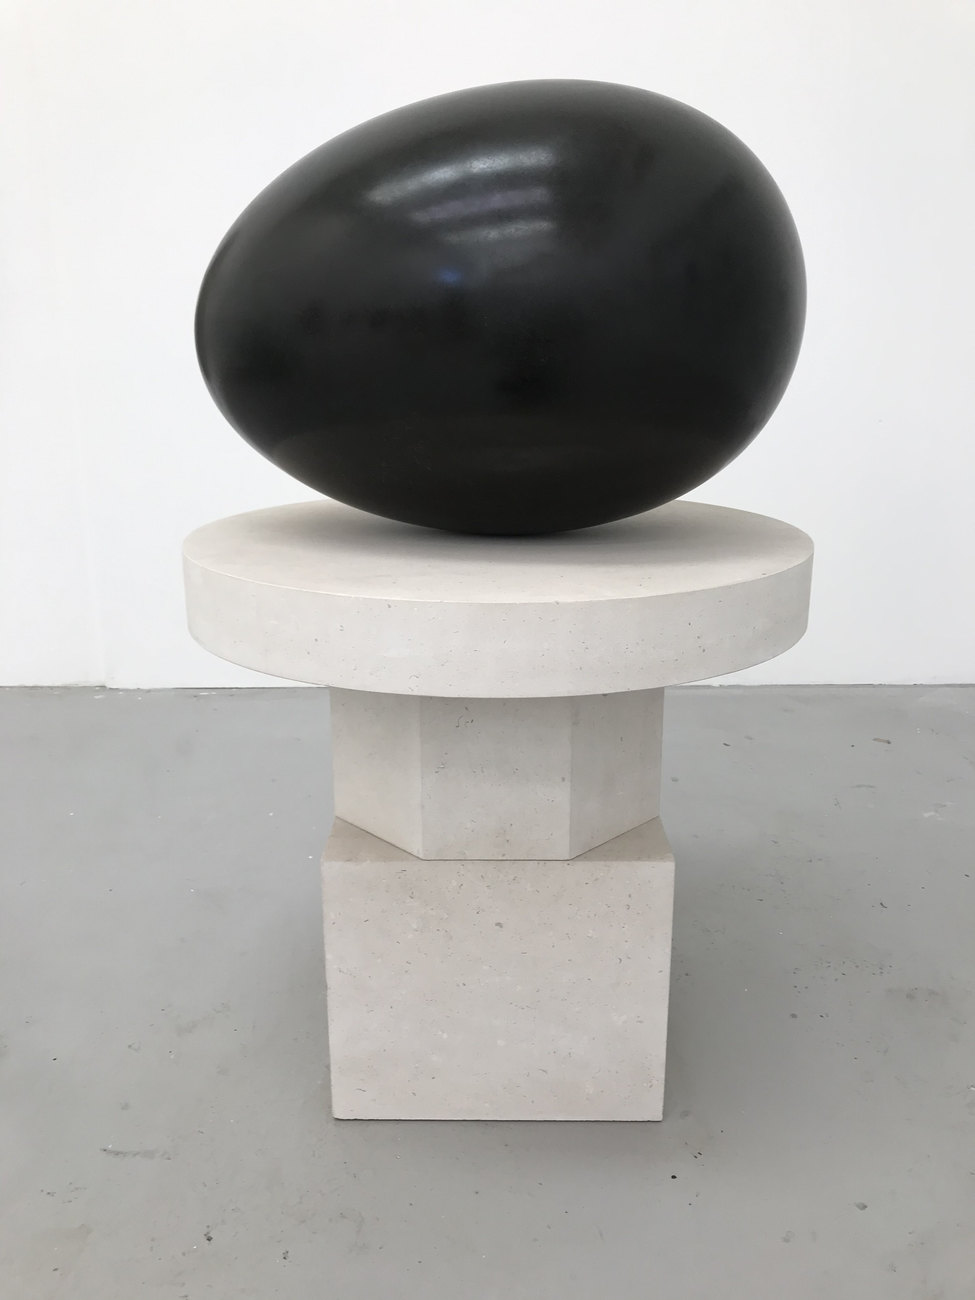 A large black egg sculpture on a stone plinth against a white walled background